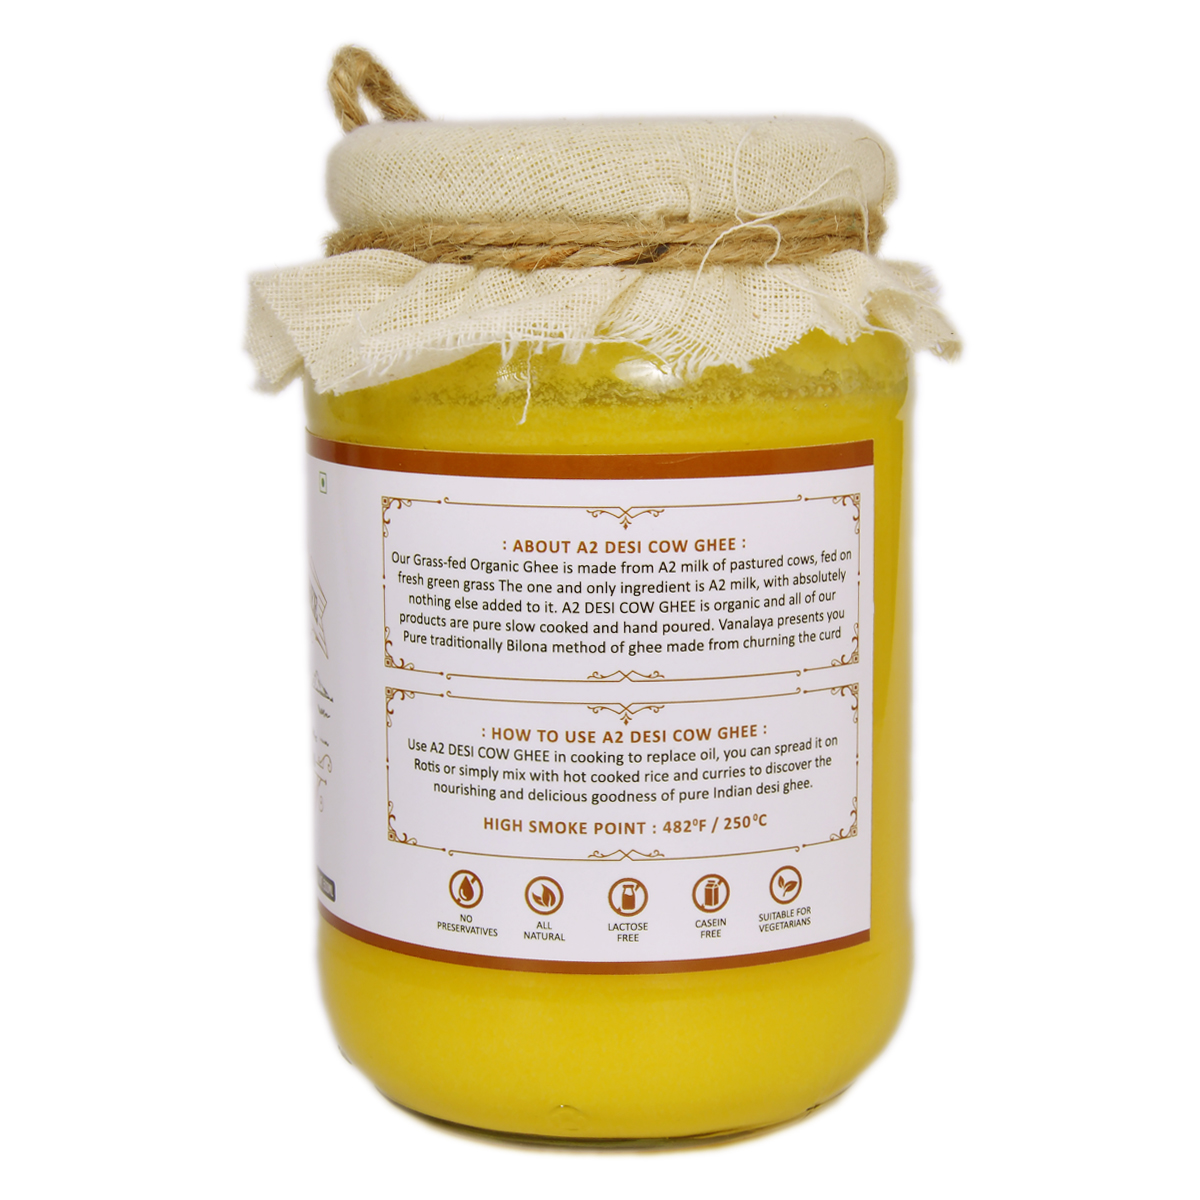 Picture of Vanalaya A2 Desi Cow Ghee from A2 Milk Prepared by Traditional Bilona Method 500ml